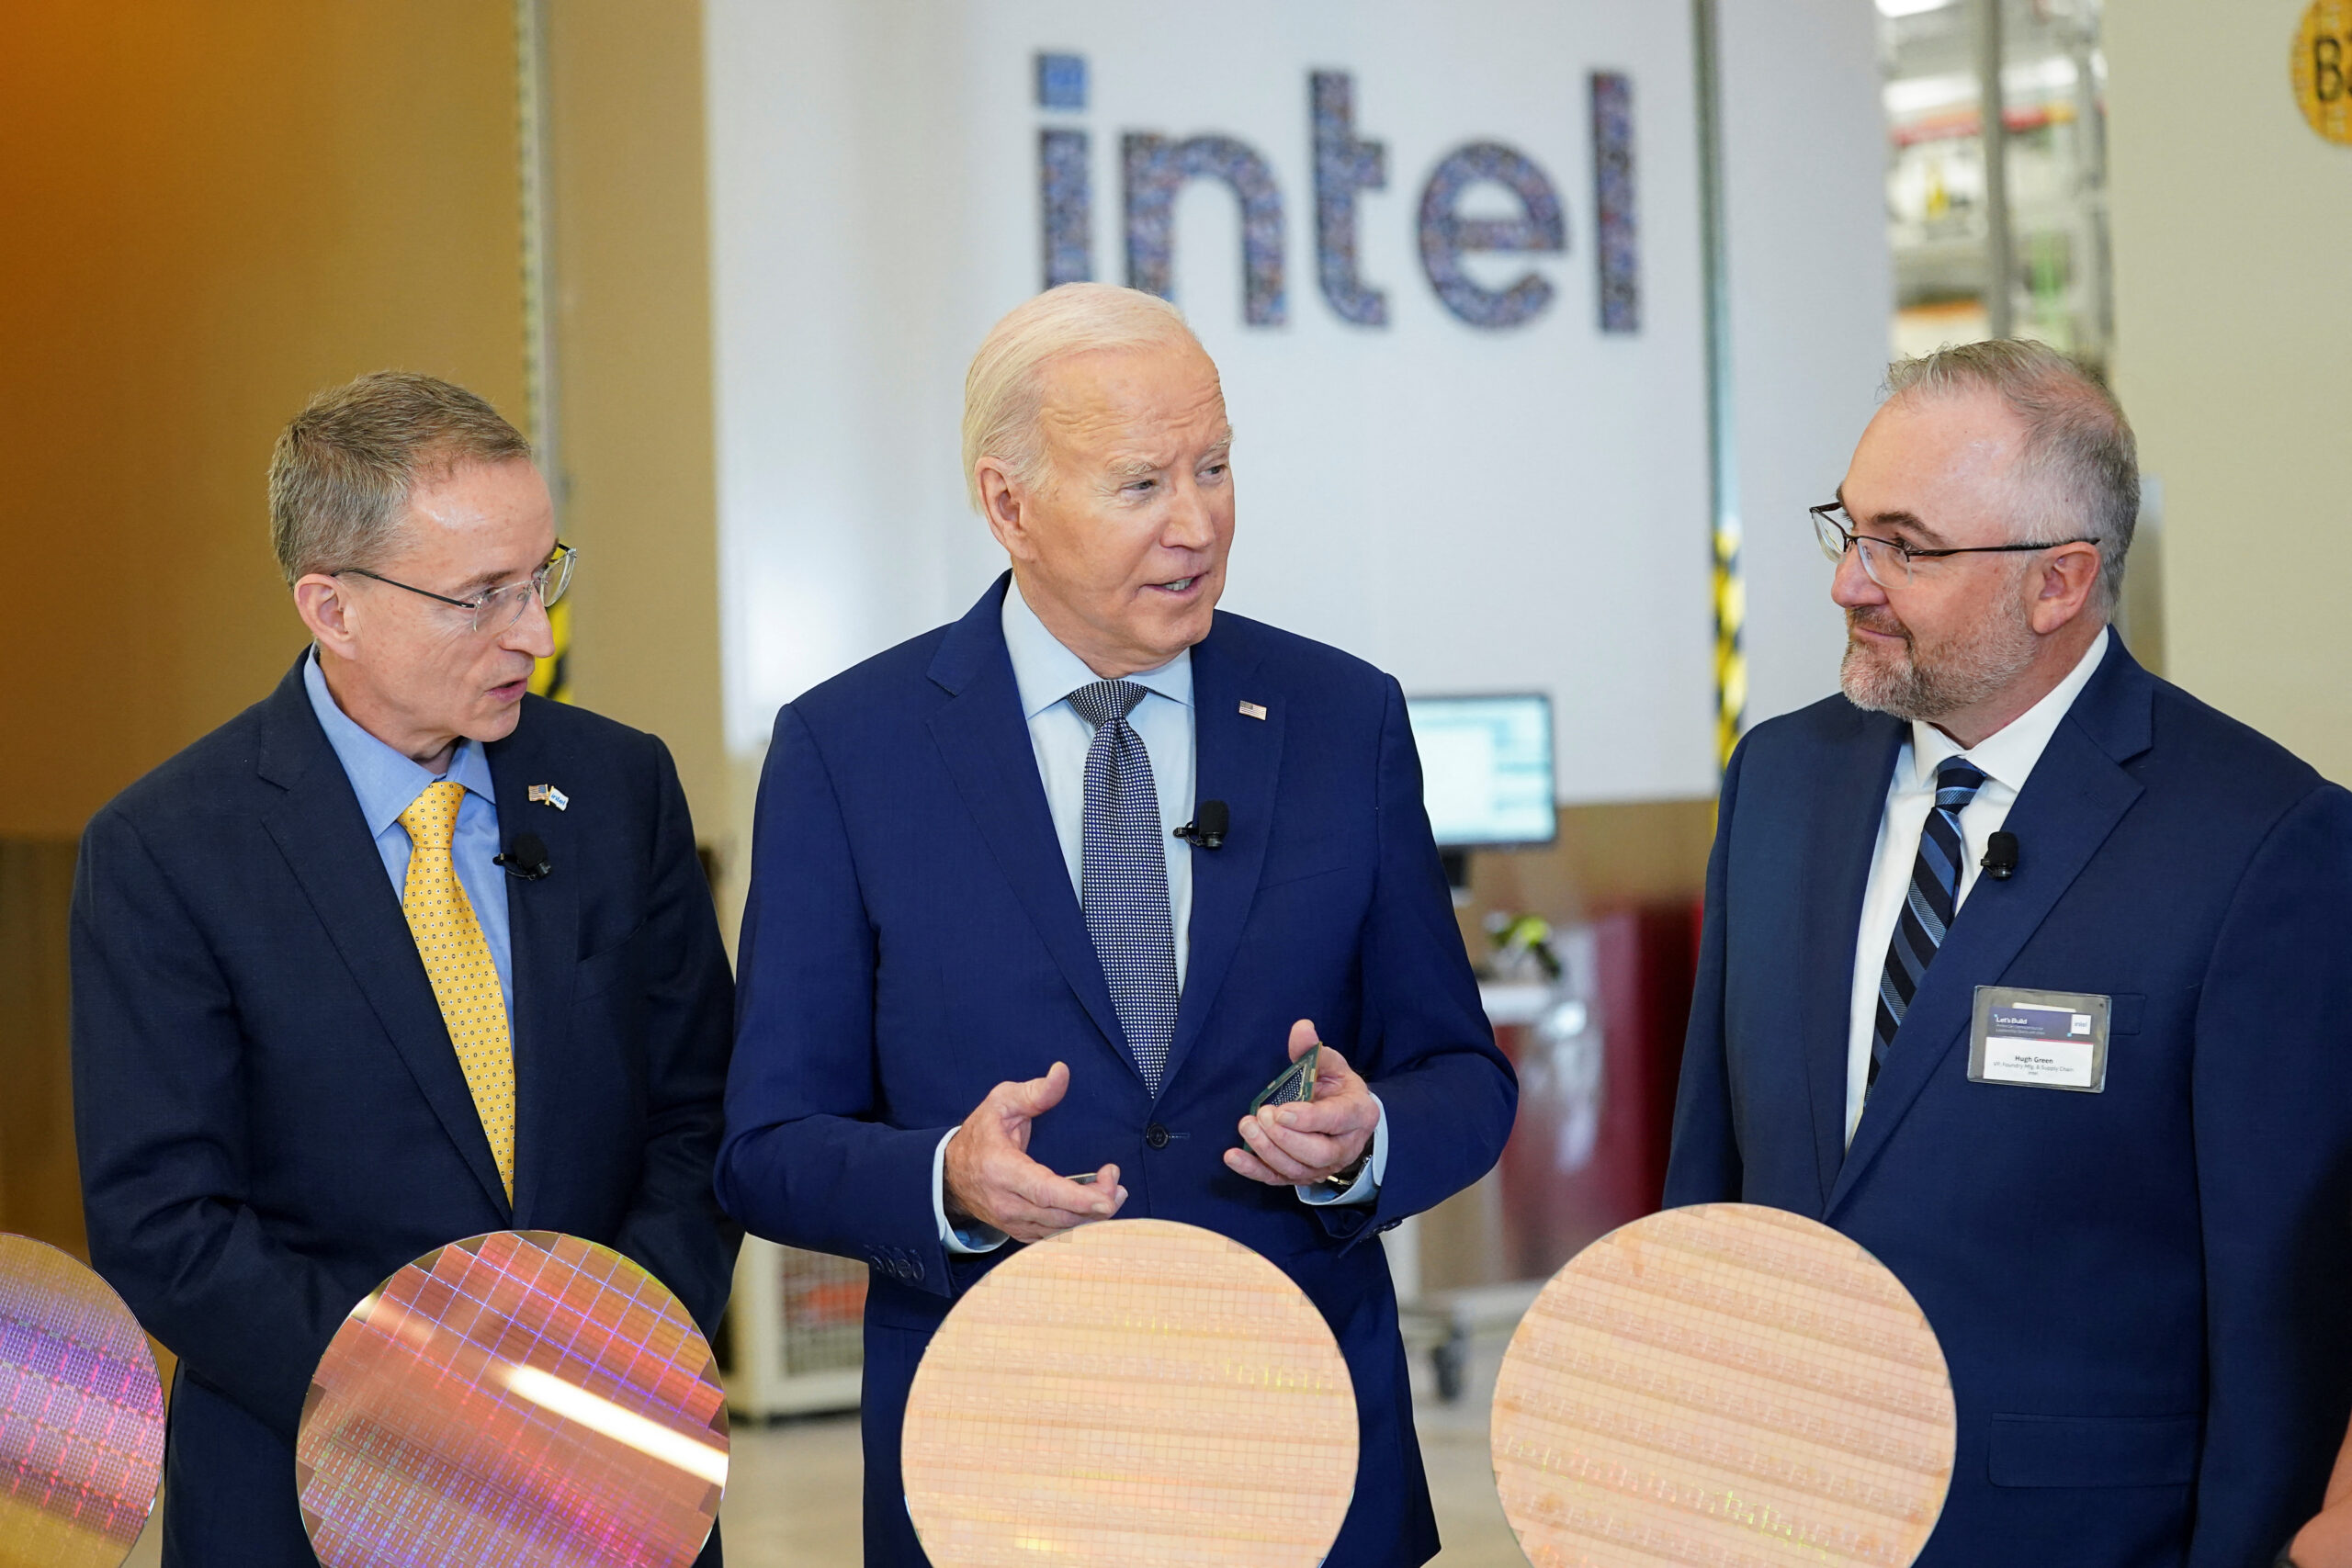 US Government Backs Intel with $20 Billion for Domestic Chip Production